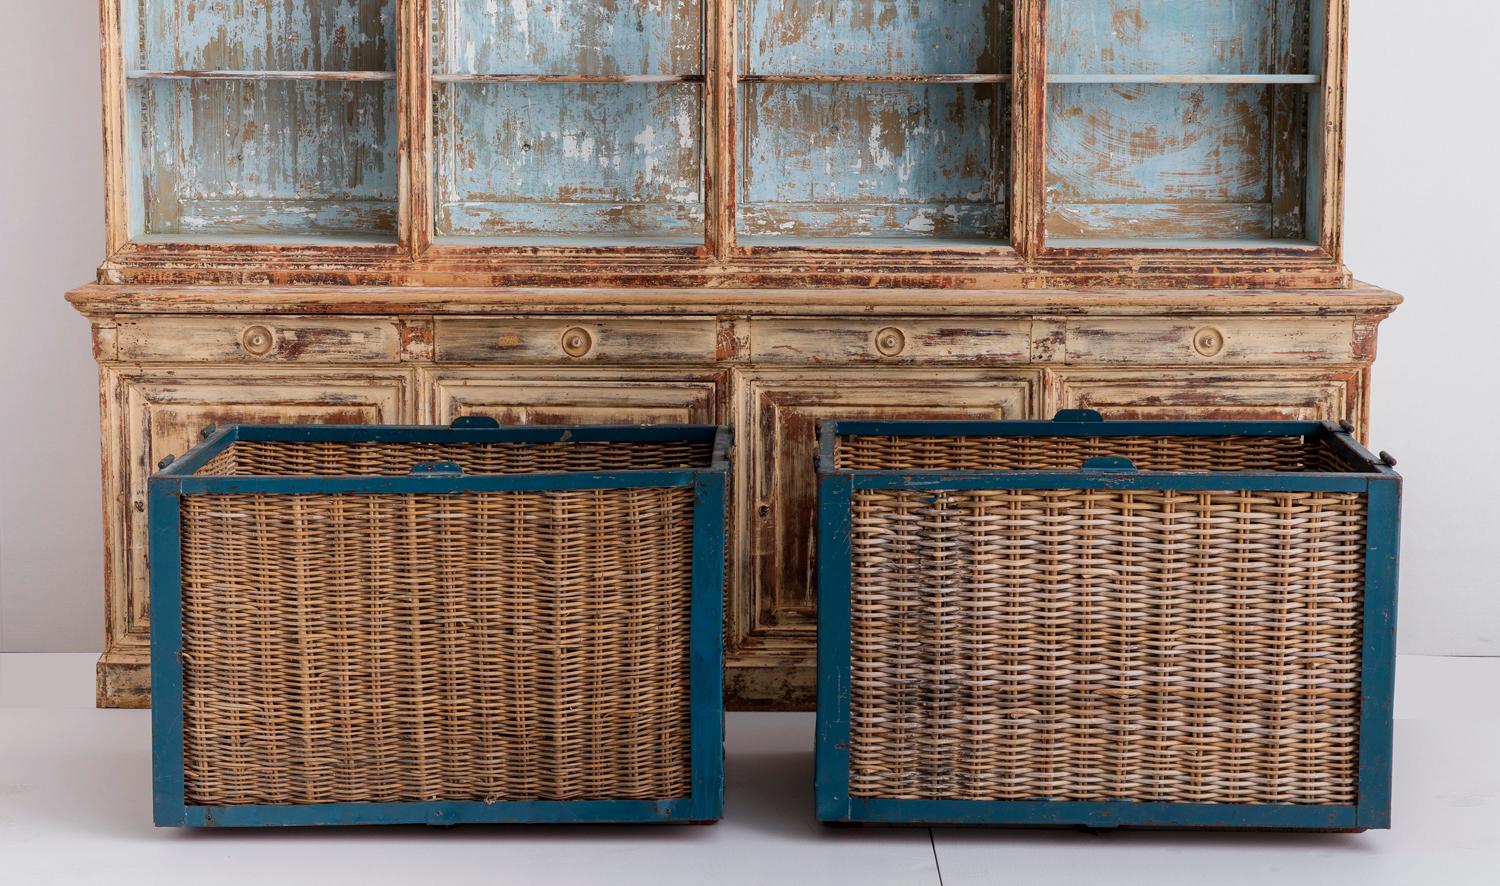 Pair of large, industrial French wicker baskets from a wool mill painted steel frames featuring original blue paint. There is some slight denting of the steel frame on one of the pieces. These baskets would work beautifully adapted into table bases